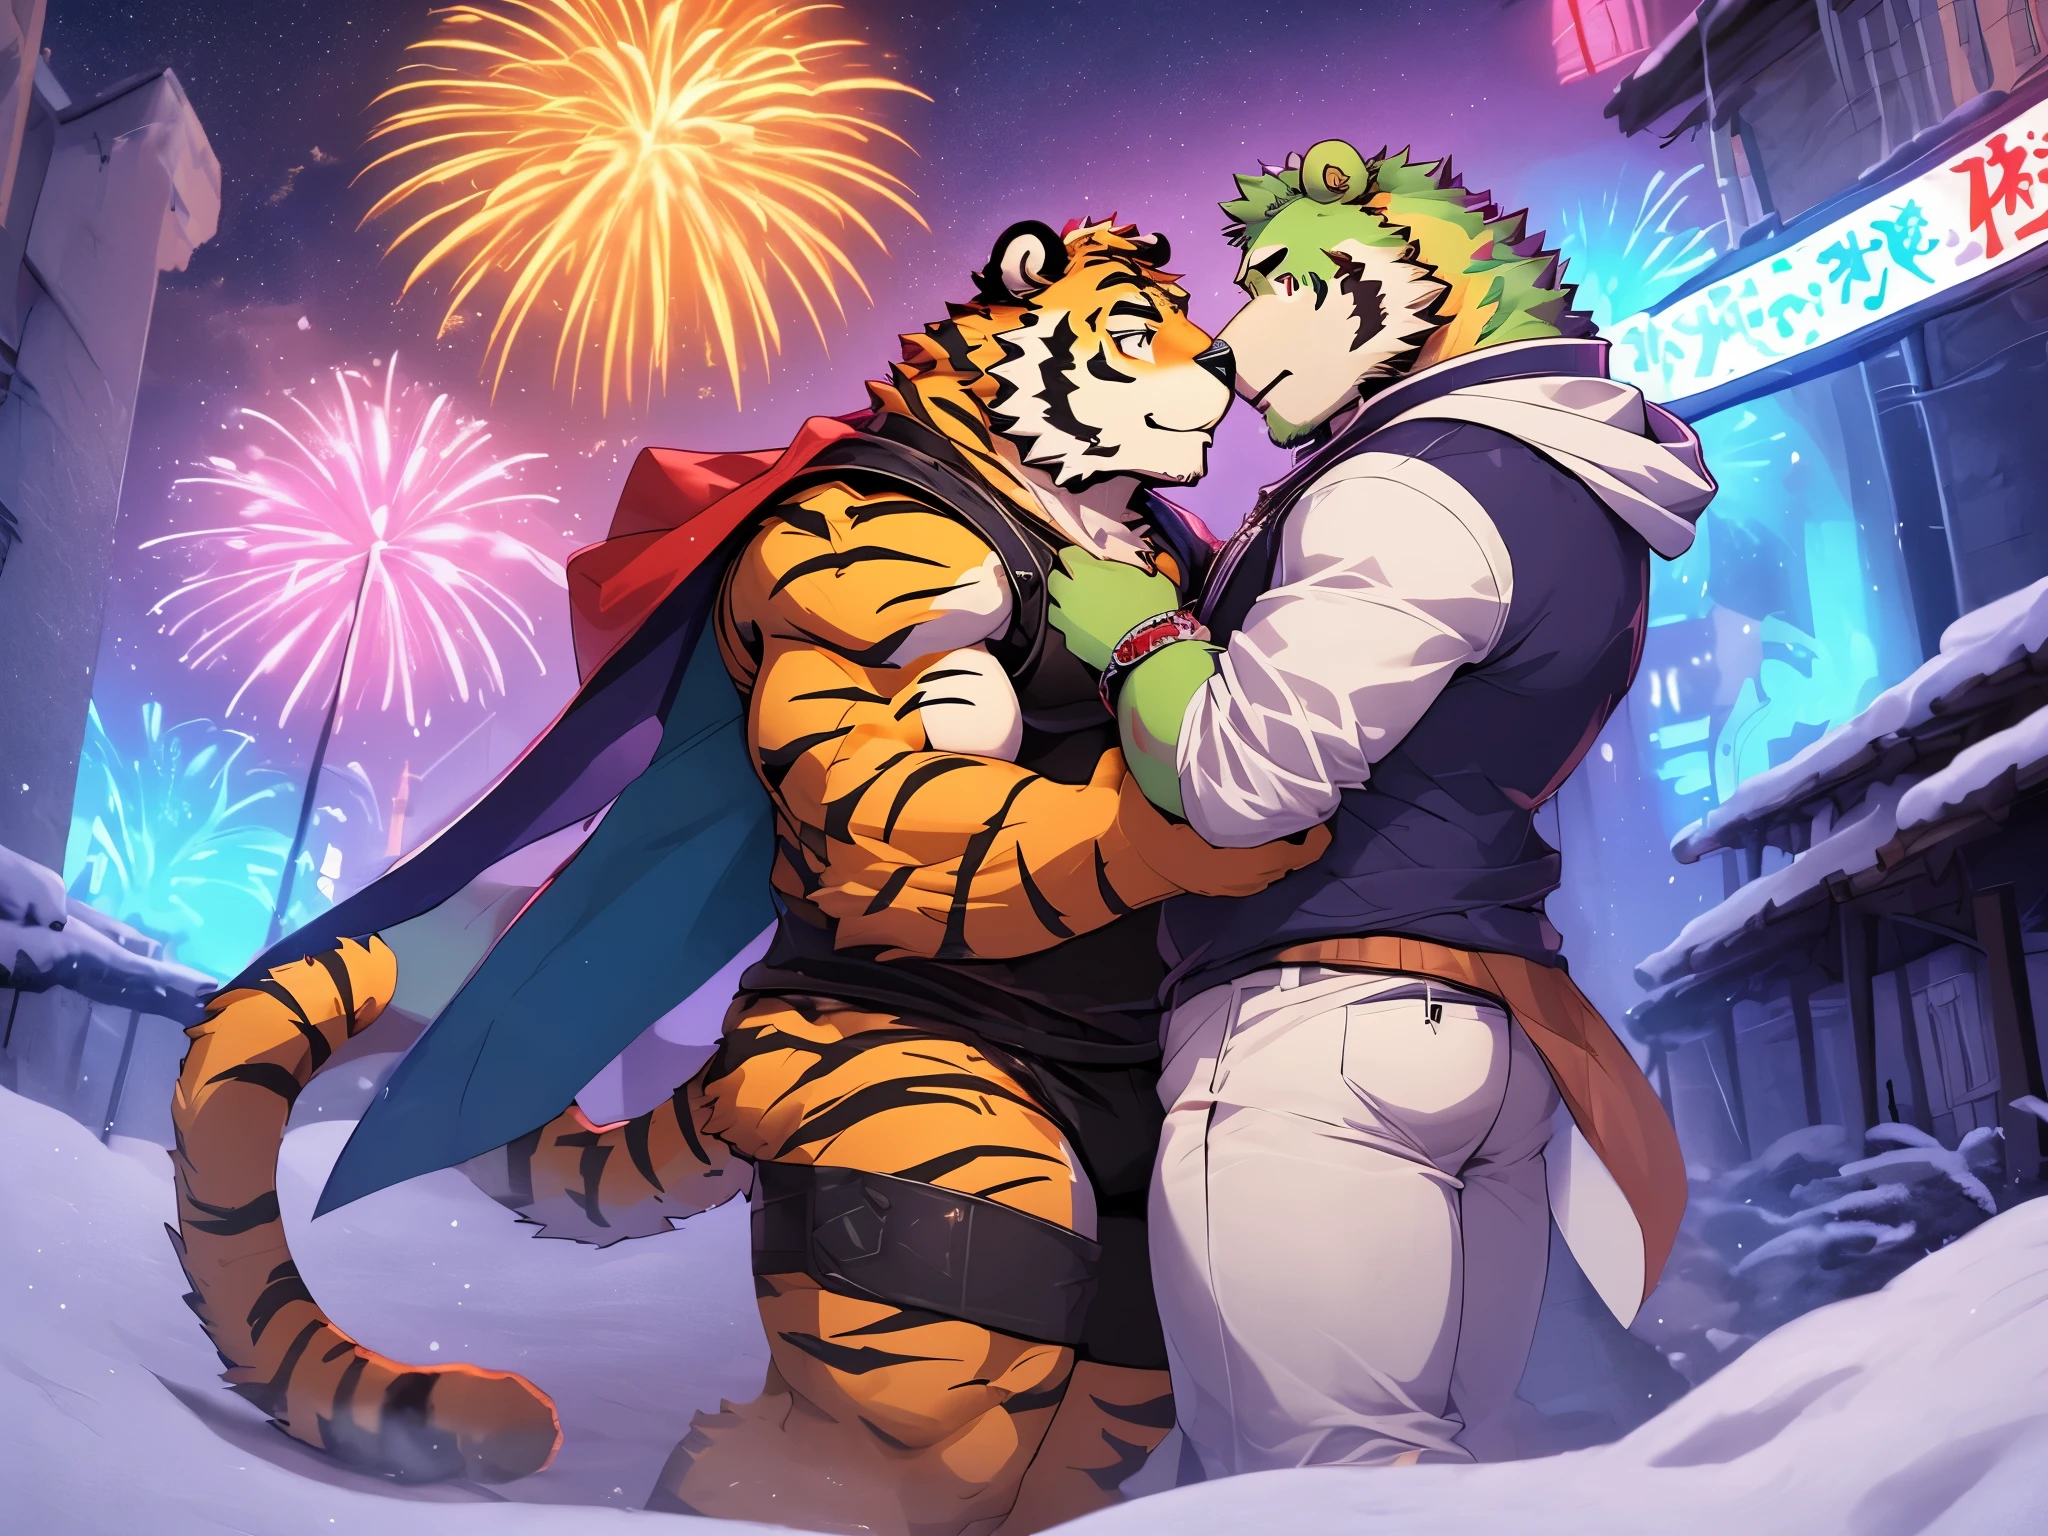 2boy, anthro ((tiger)) with anthro ((bear)), ((kosutora)) going out with ((jinpei)), casual clothes, kissing under fireworks, crowded street, winter, happy new year scenery,